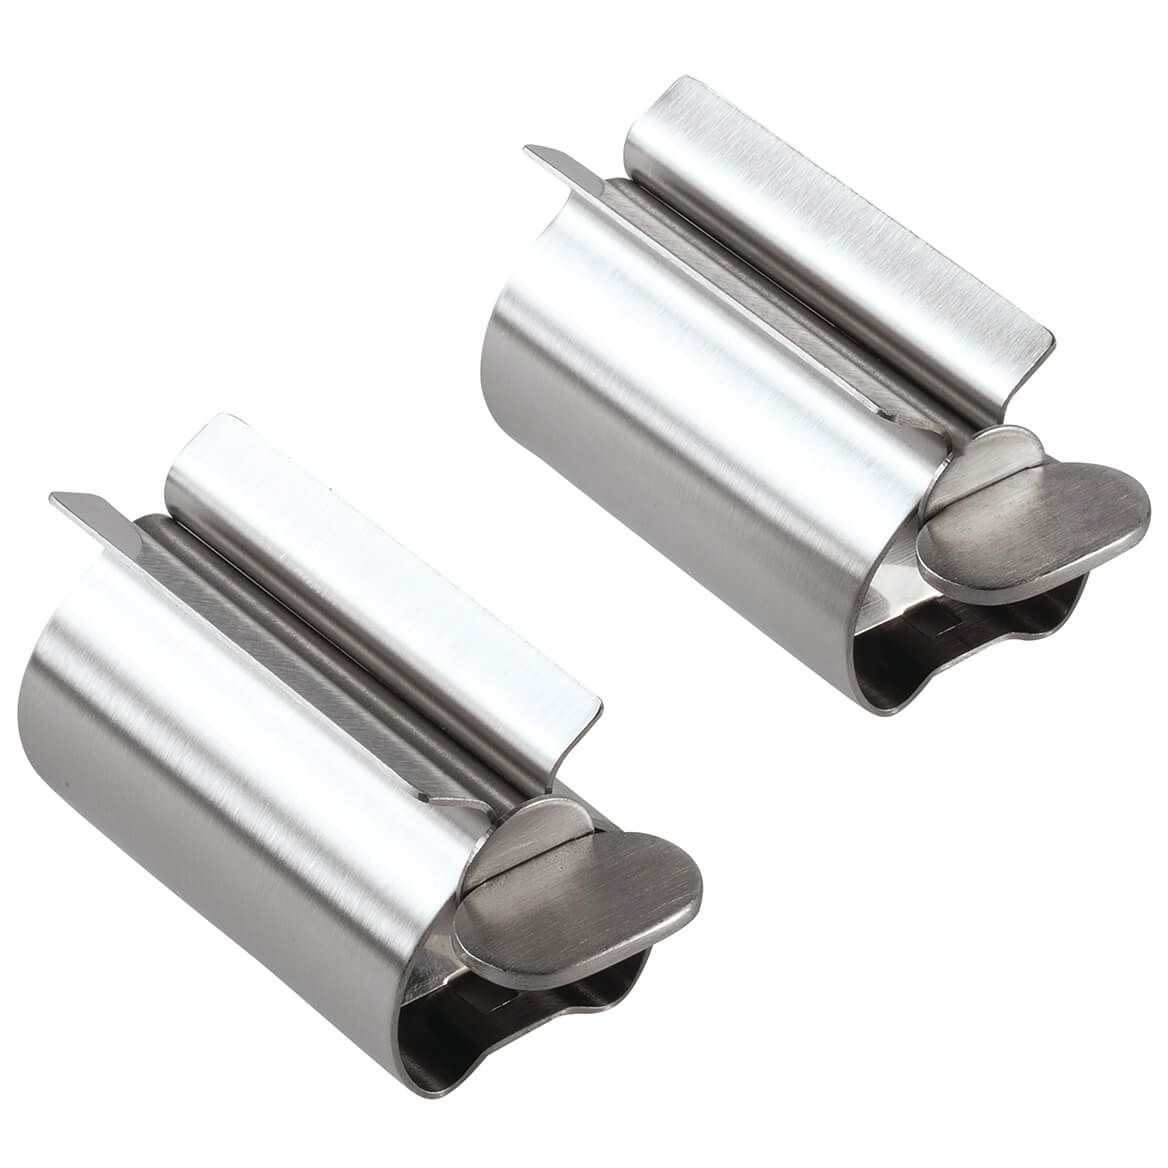 Stainless Steel Toothpaste Squeezers, Set of 2 + '-' + 376202